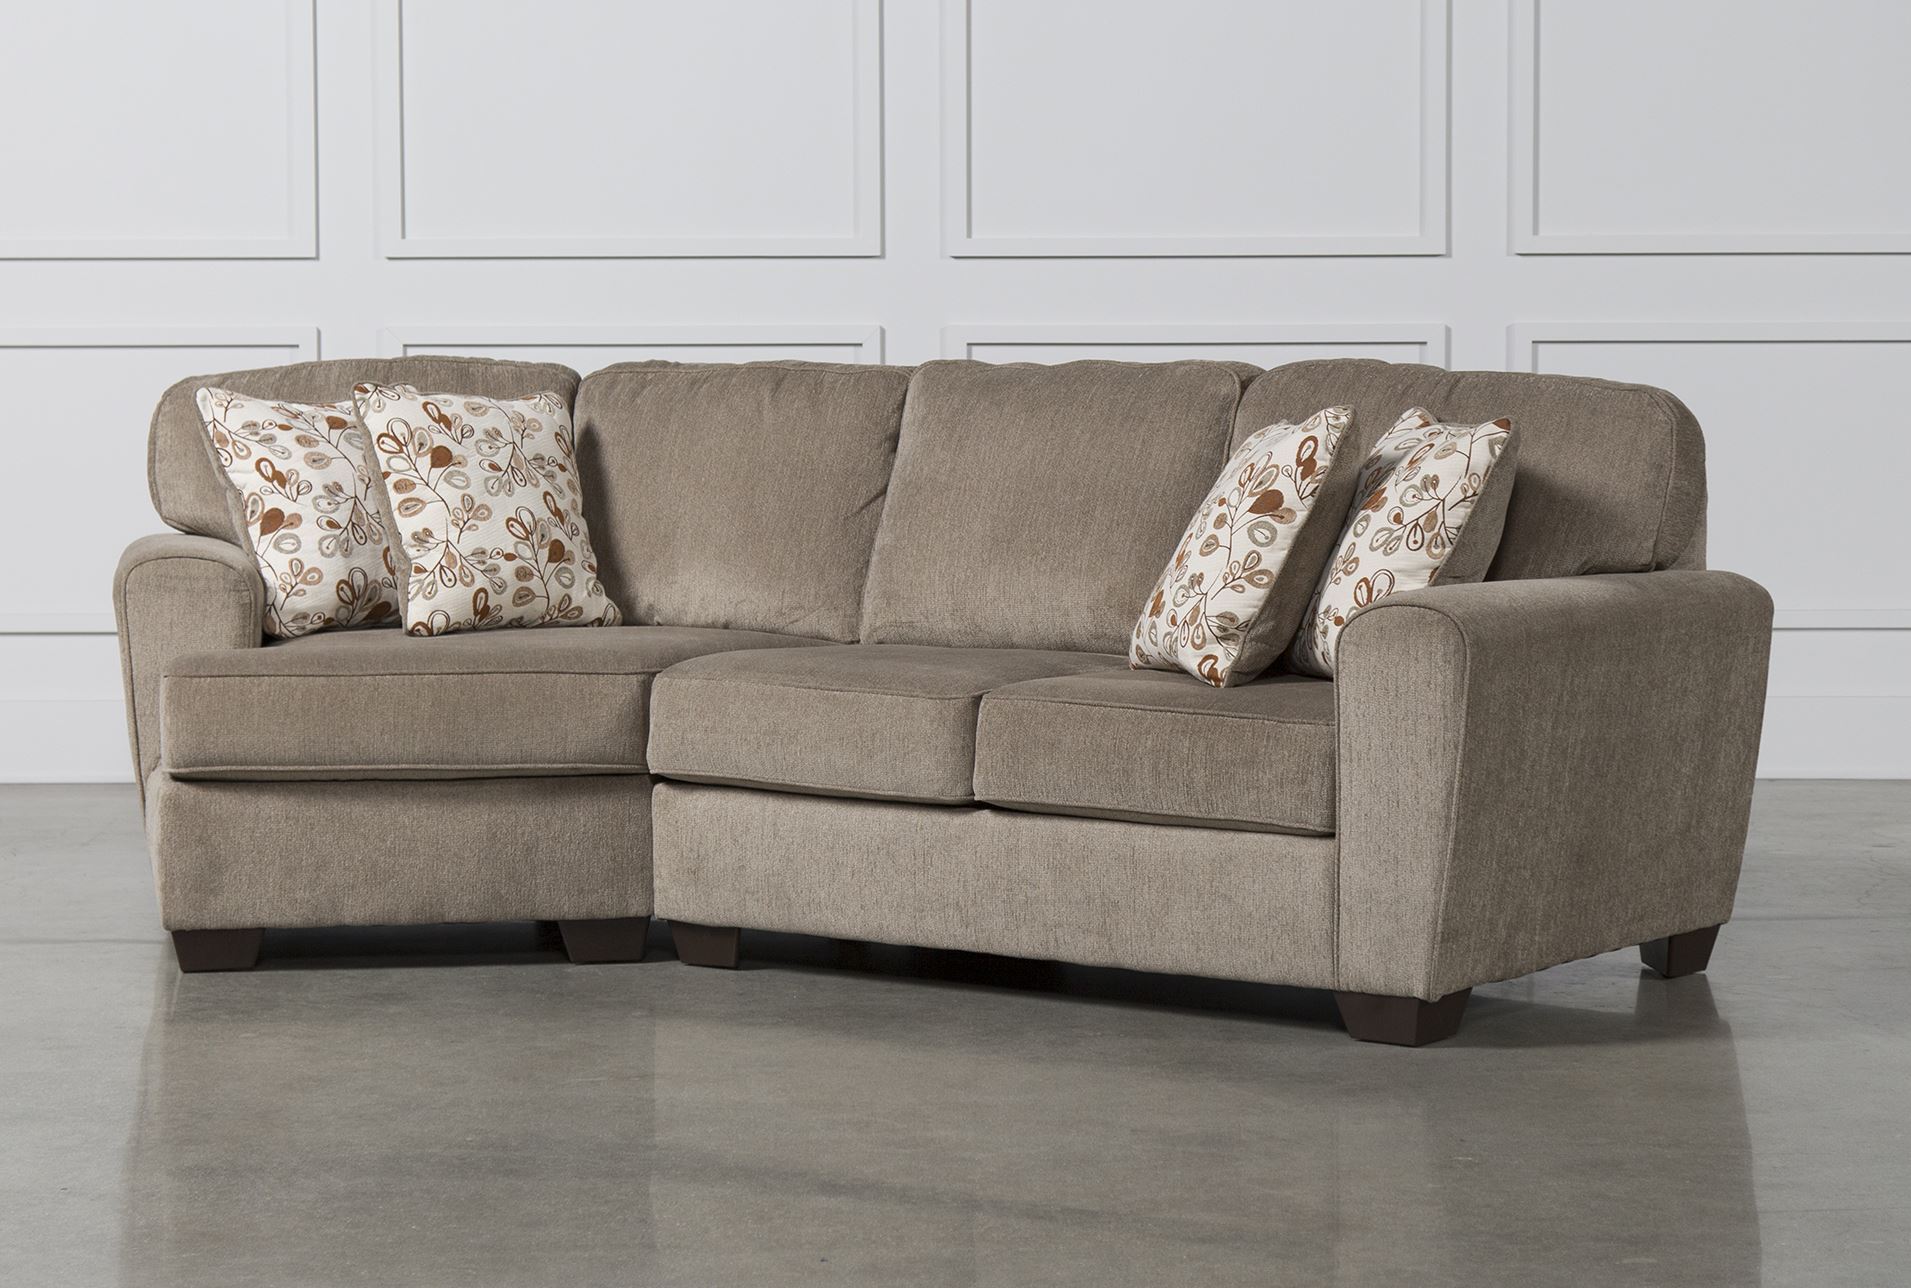 Patola Park 2 Piece Sectional W/Laf Cuddler Chaise ...